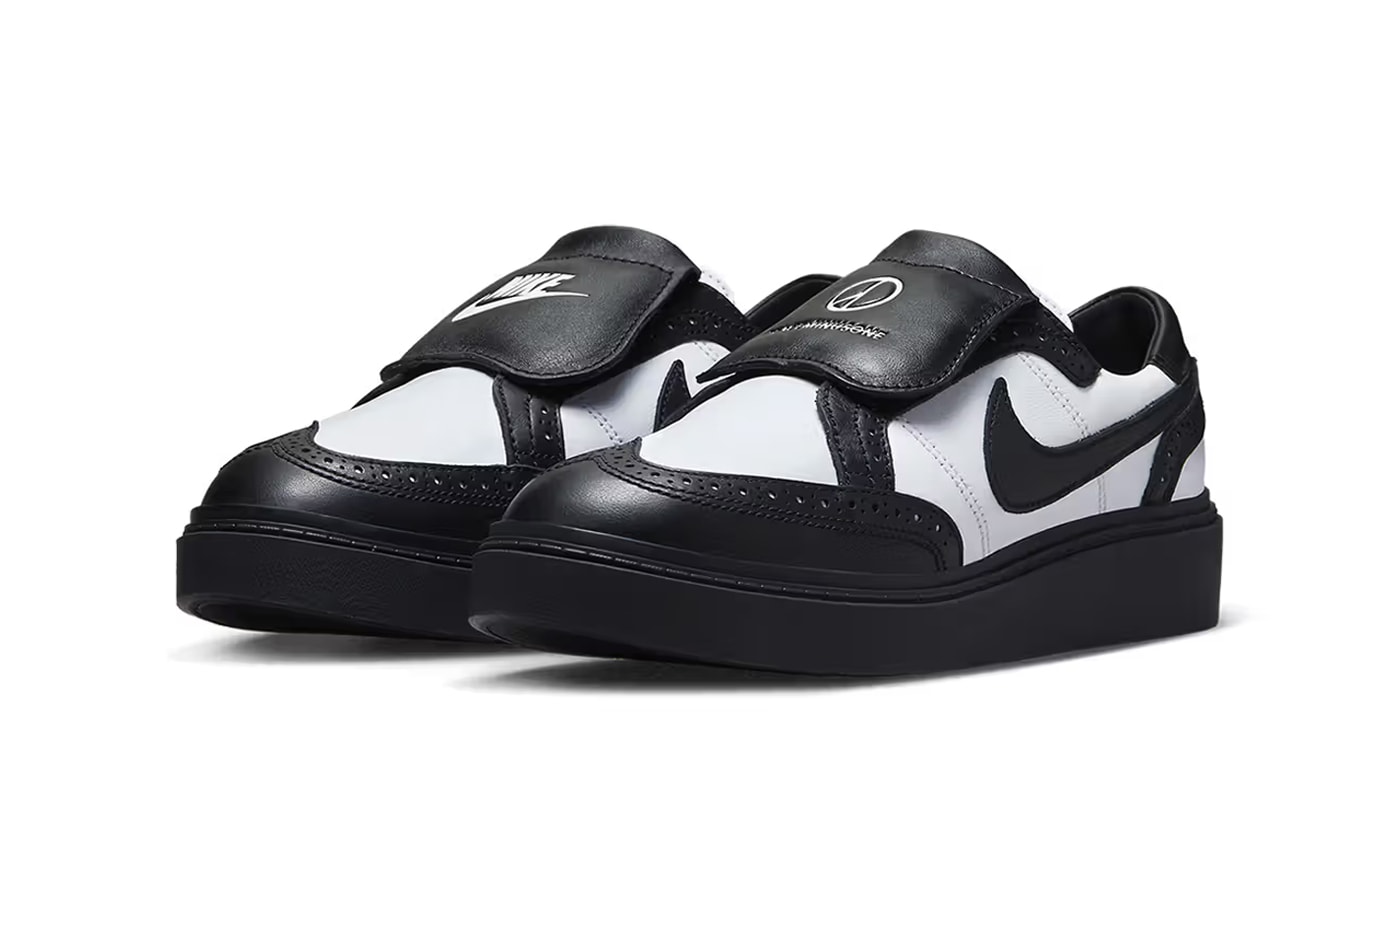 peaceminusone nike kwondo 1 panda DH2482 101 release date info store list buying guide photos price 